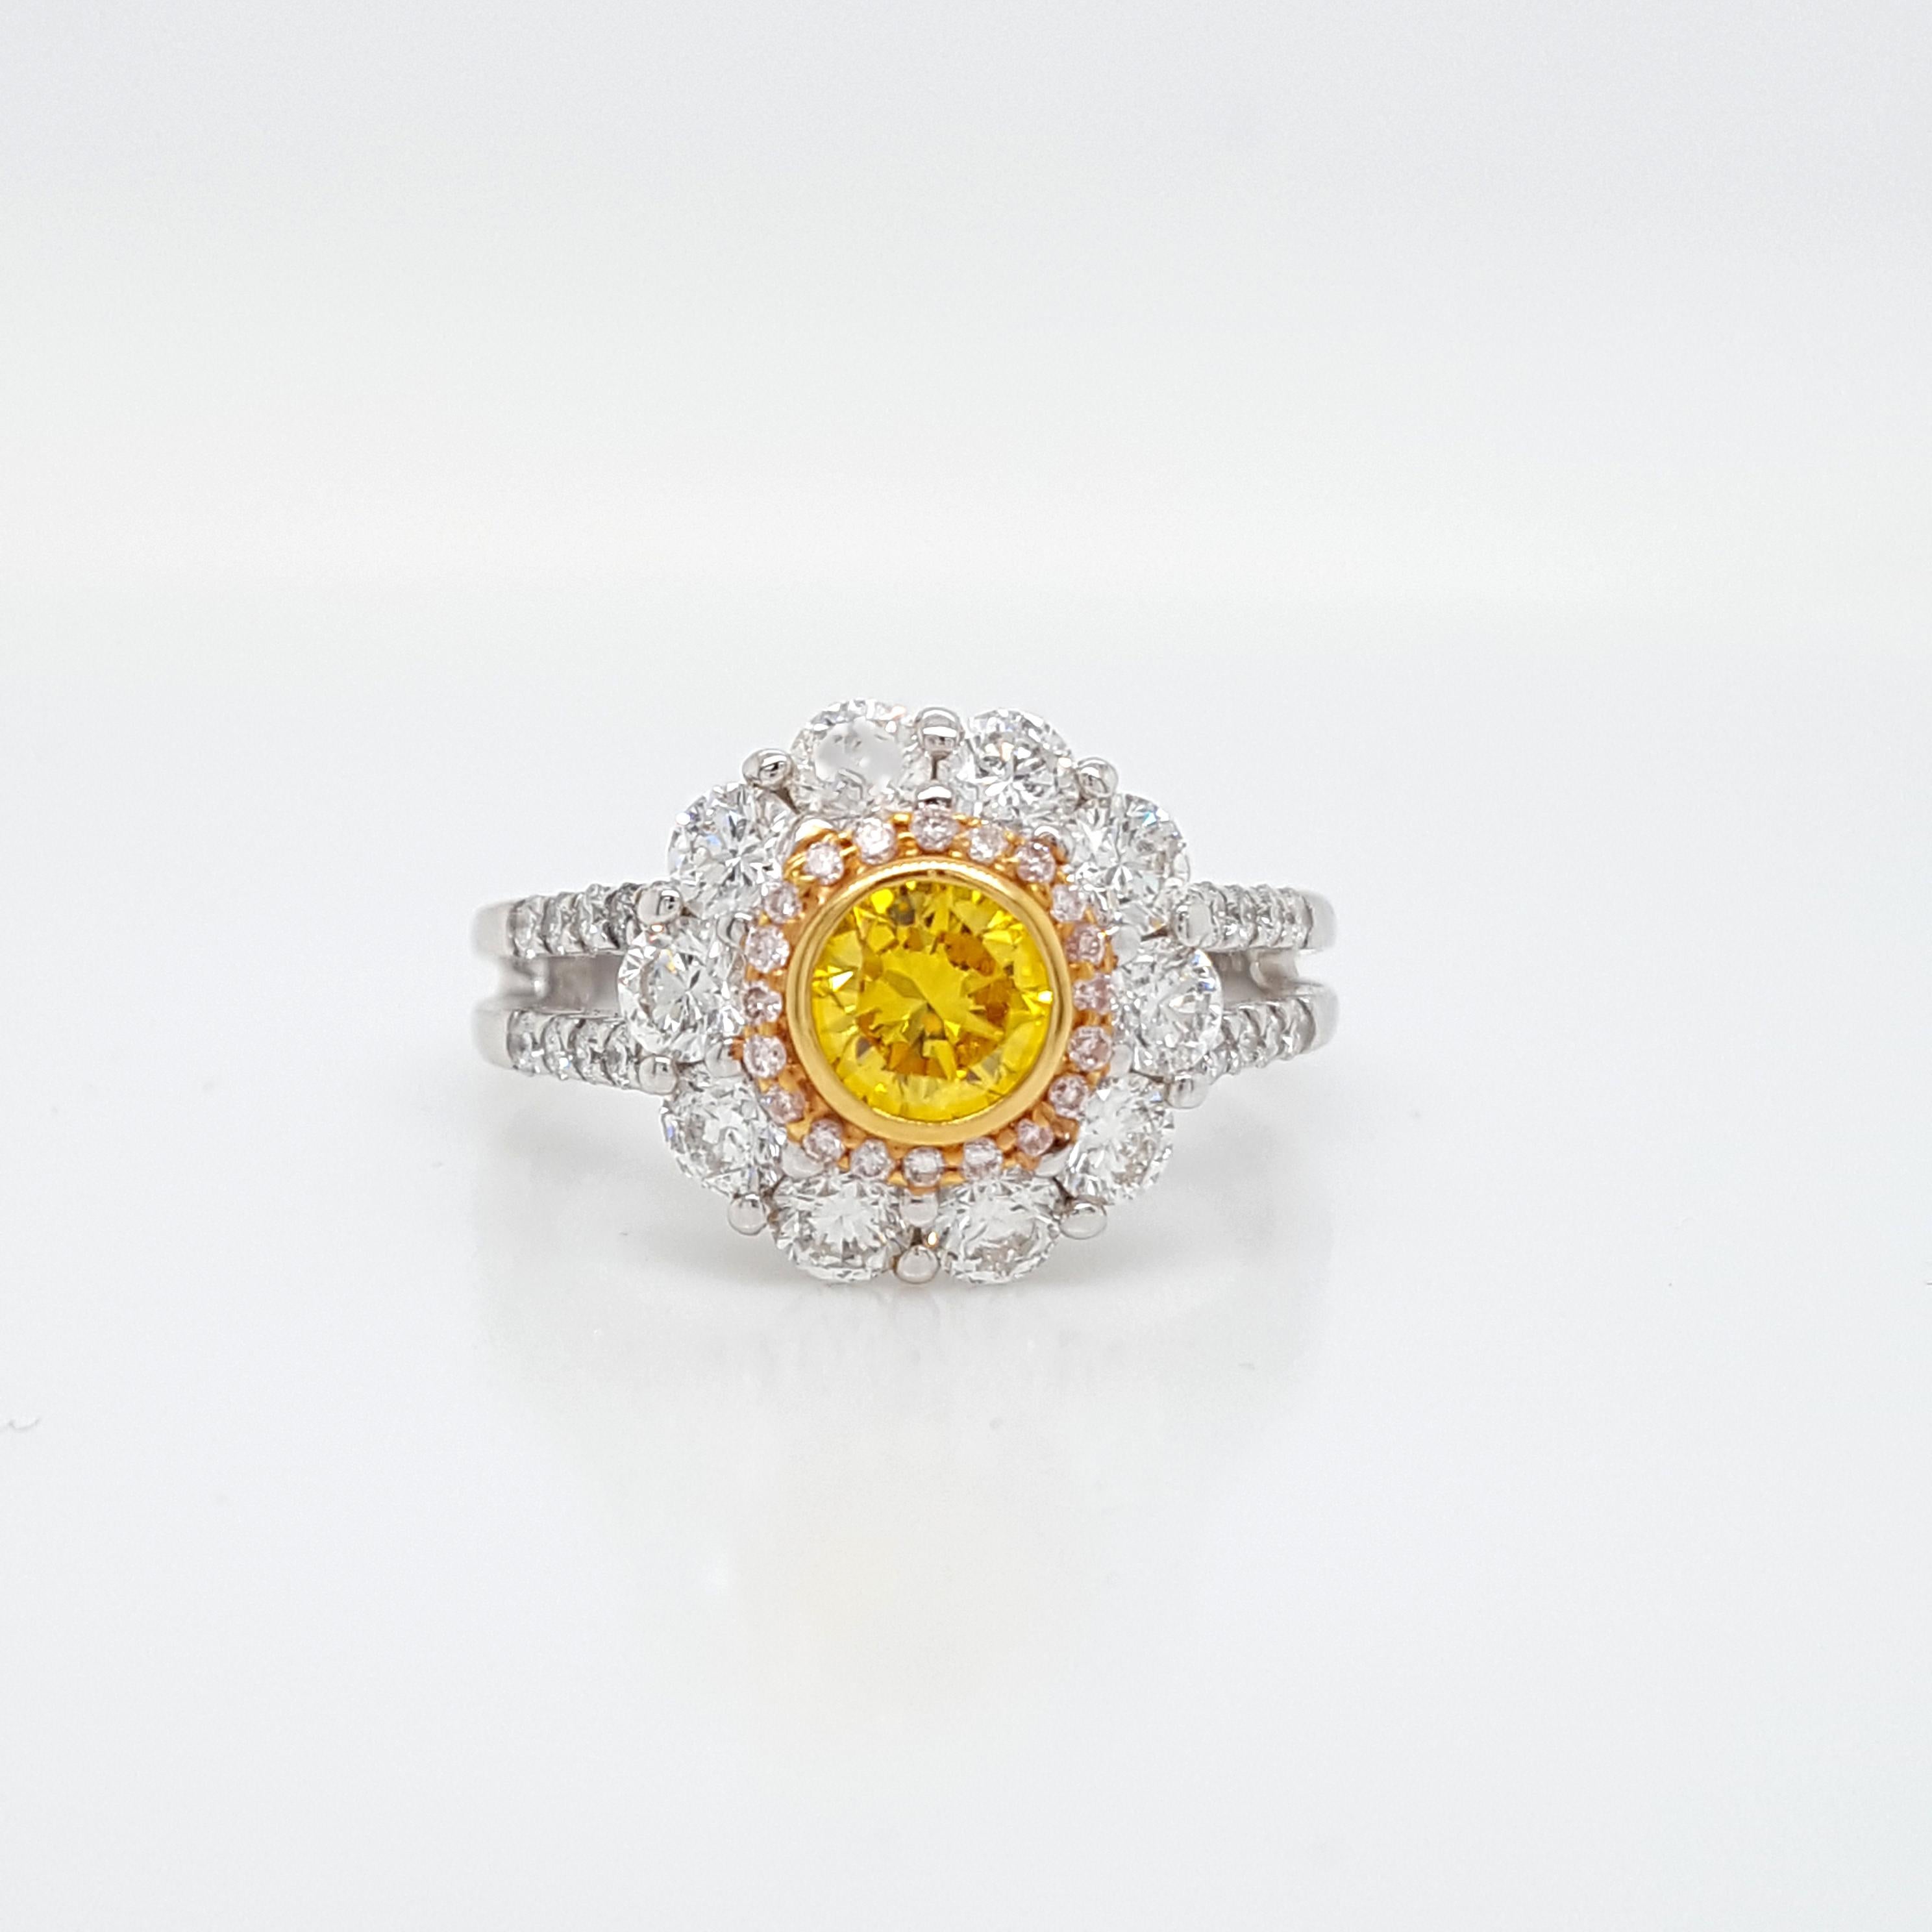 A gorgeous Engagement Cocktail ring Showcasing 0.44 Carat round brilliant cut Fancy Vivid Yellow Diamond, GIA Certified as VS1 clarity. Surrounded by colorful accents of 0.08 carat Fancy Pink diamonds offer a vibrant take. accompanied by 30 round